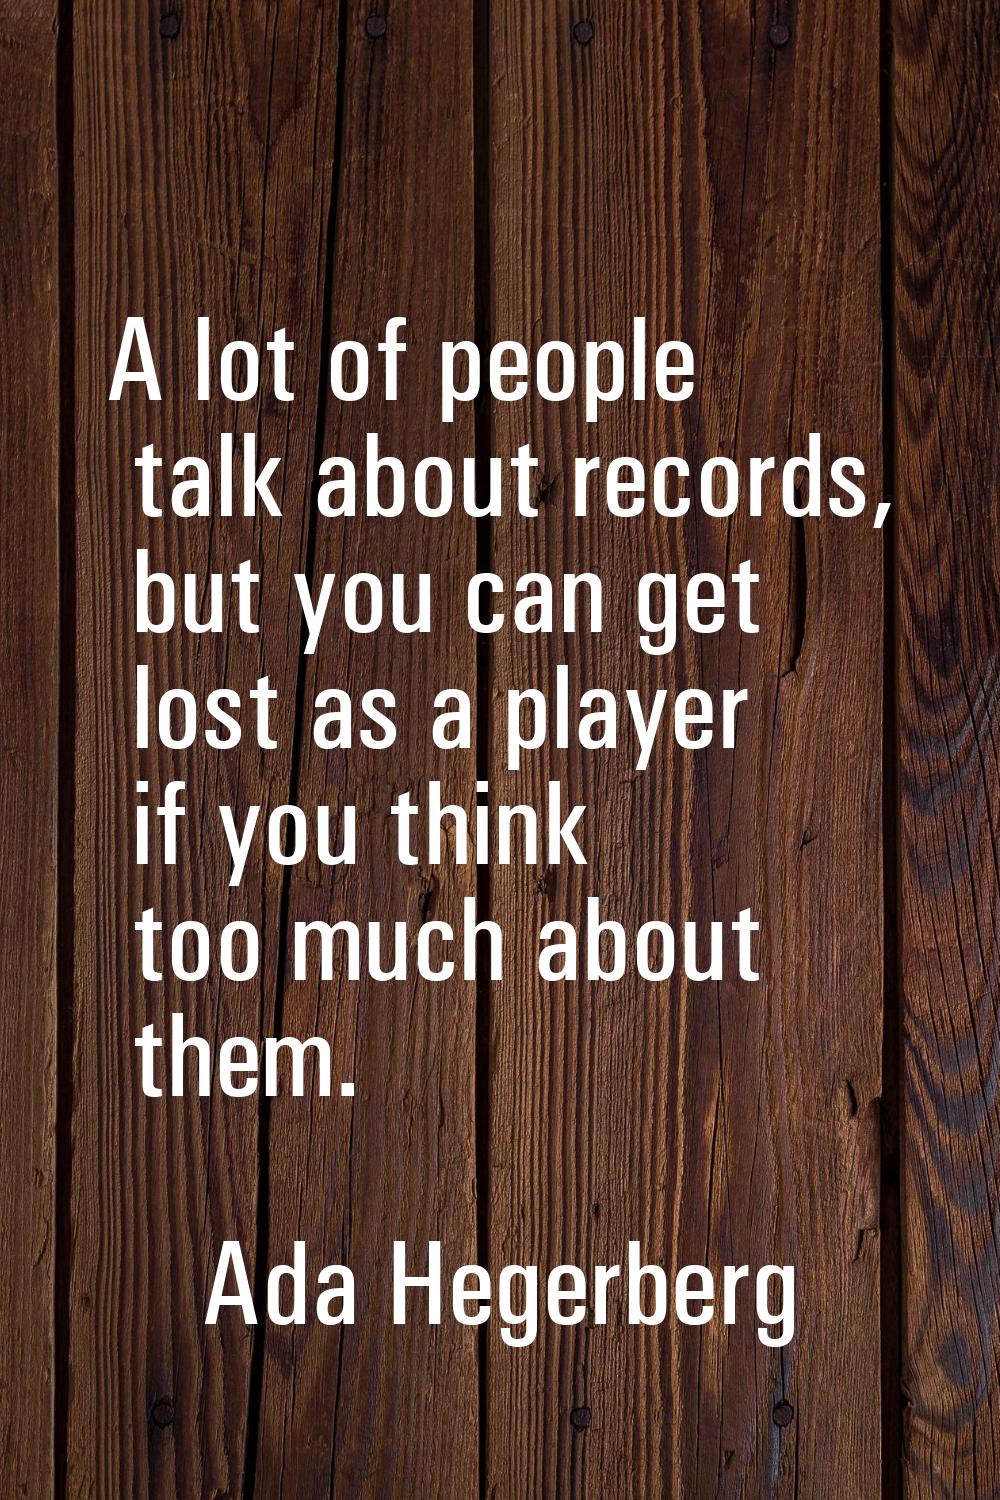 A lot of people talk about records, but you can get lost as a player if you think too much about th